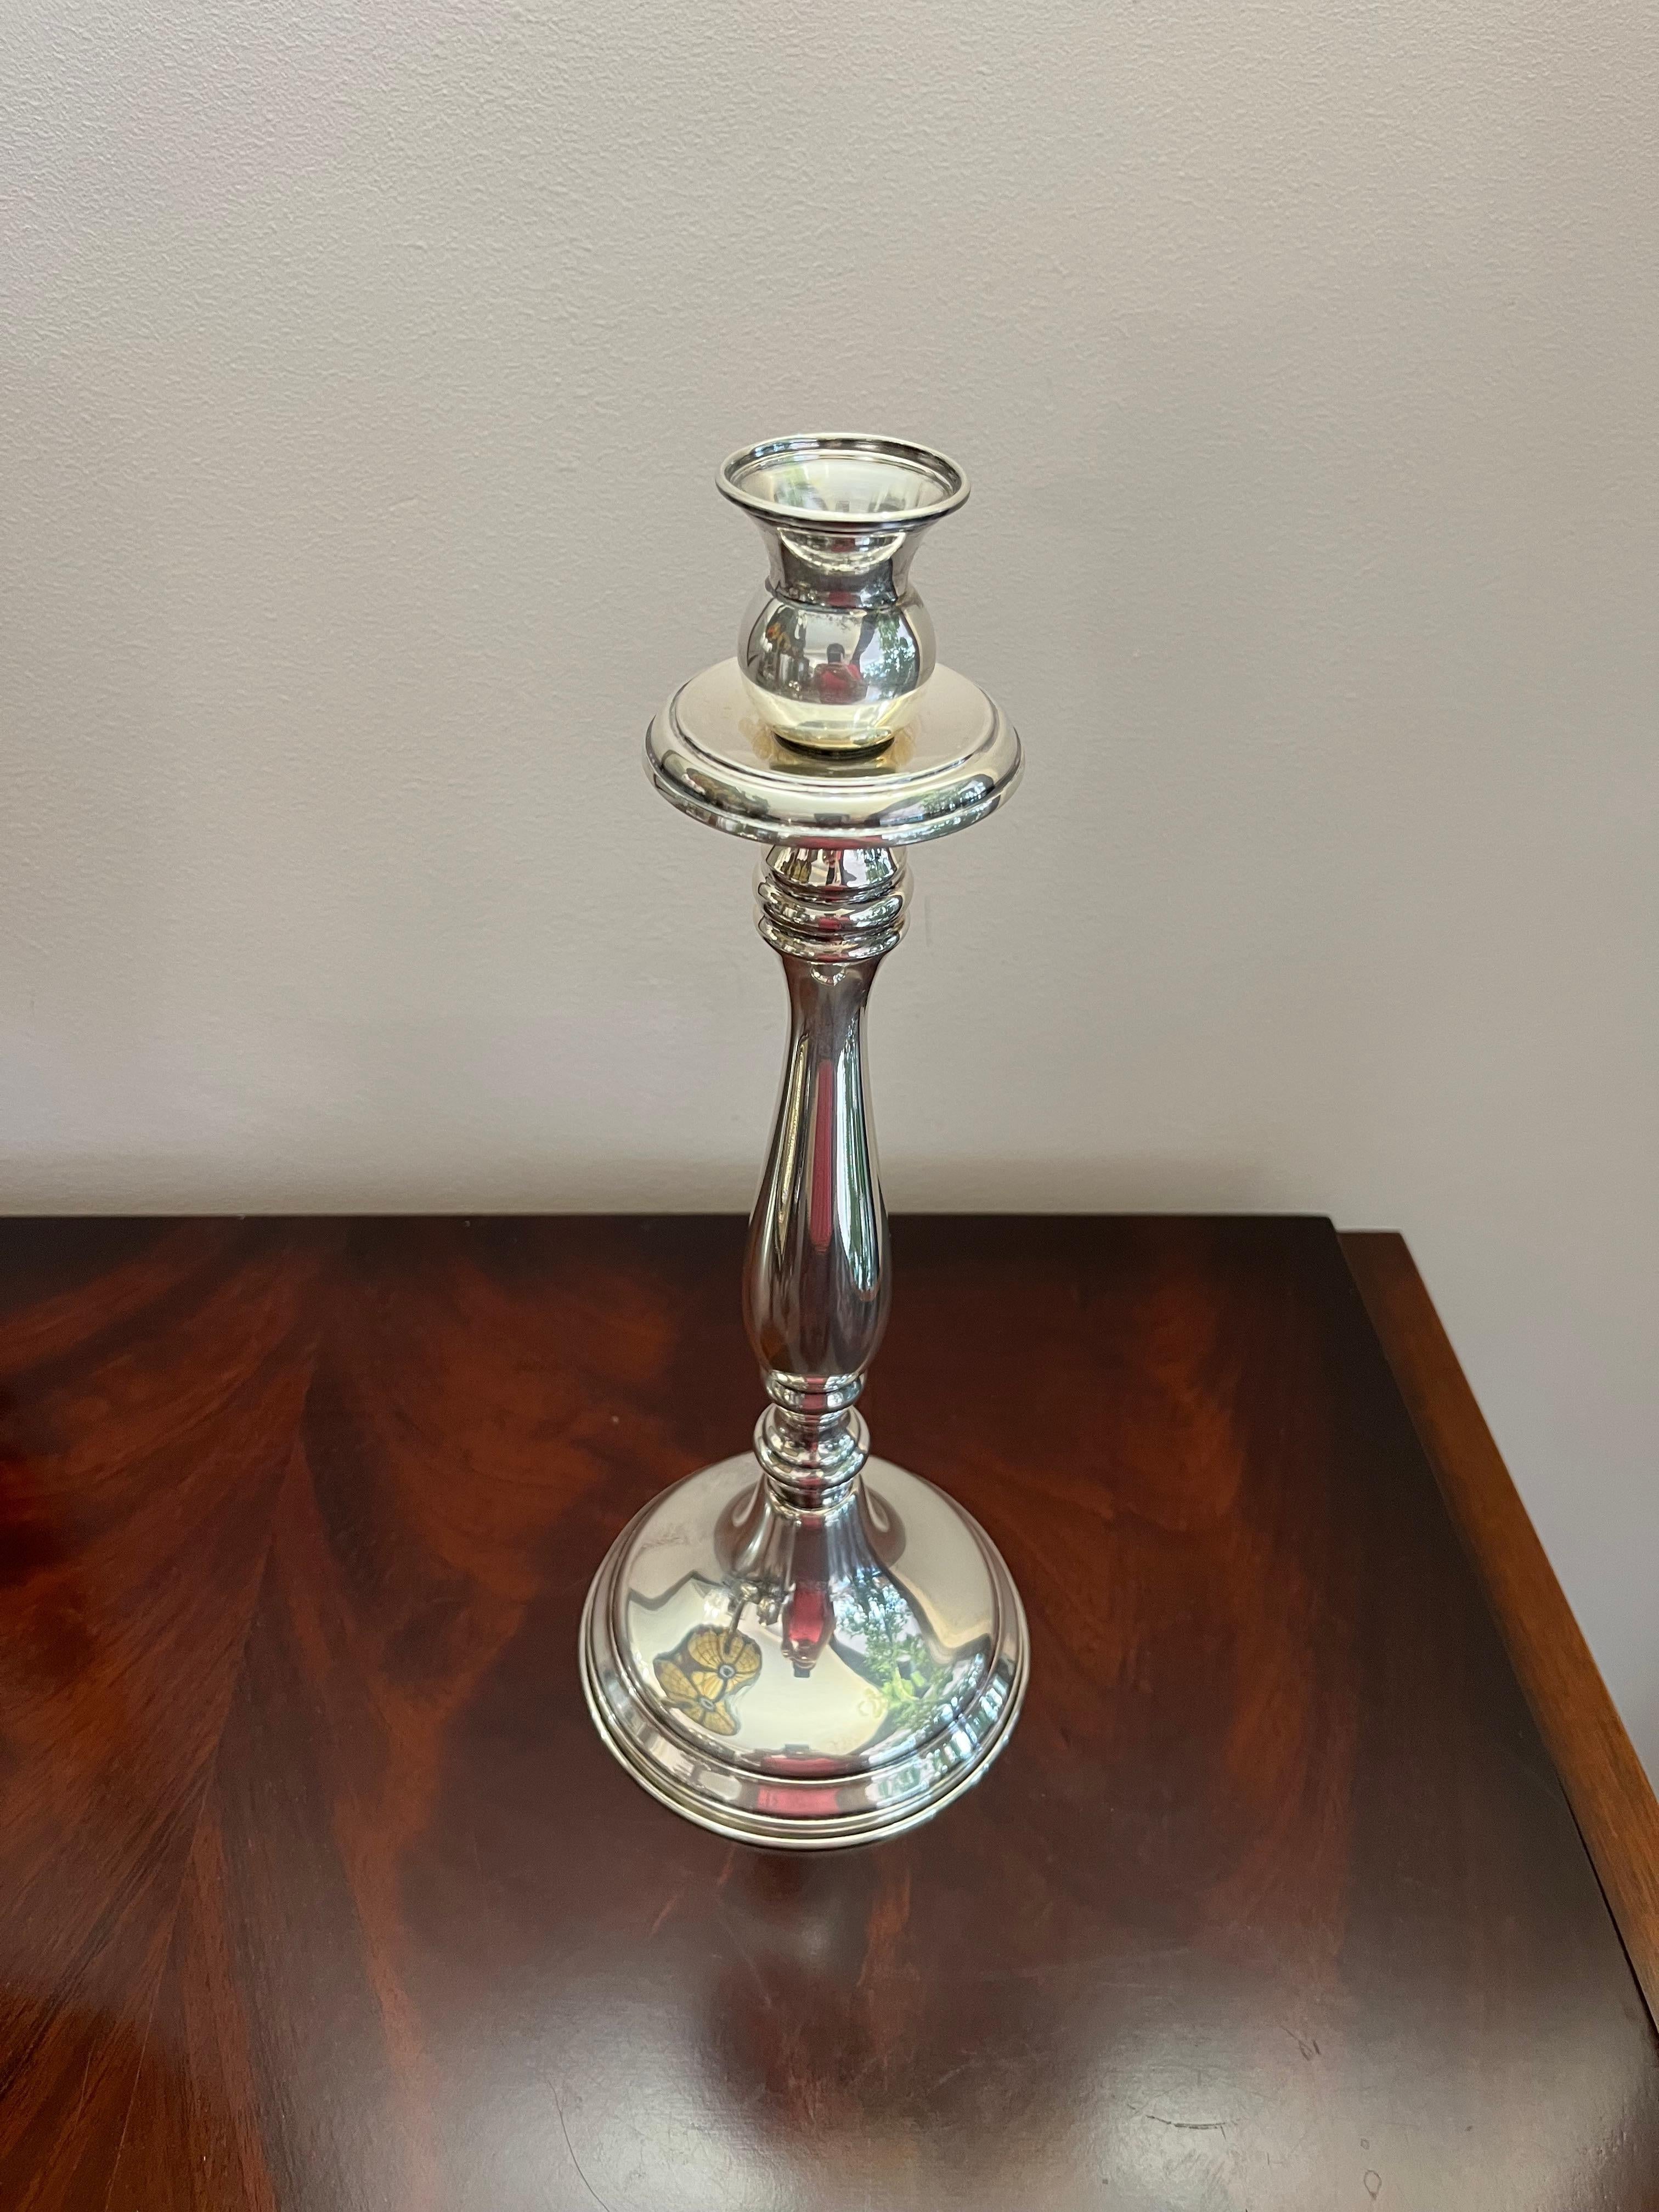 Vintage candlestick in 800 silver, English style, Italian production from the 1980s. It weighs 191.00 grams. It has never been used and is in excellent condition. Regularly stamped with identifying state marks.